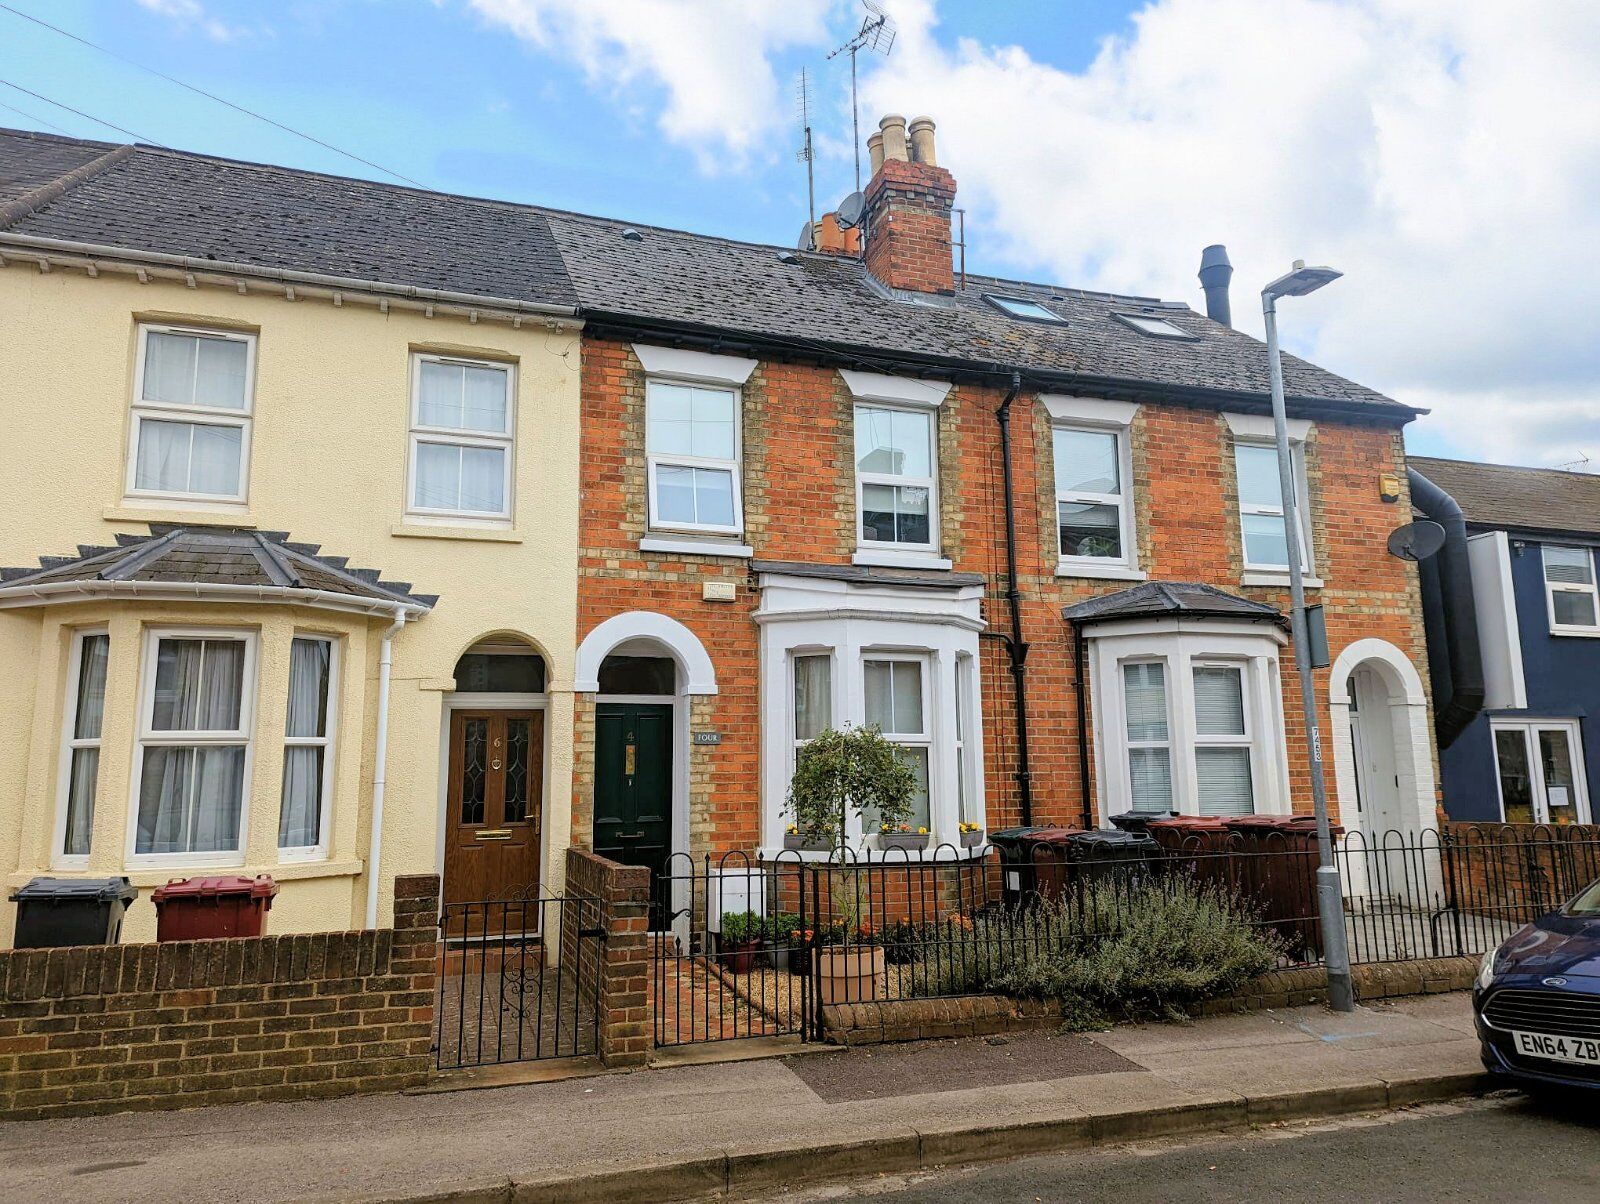 2 bedroom mid terraced house for sale Hatherley Road, Reading, RG1, main image